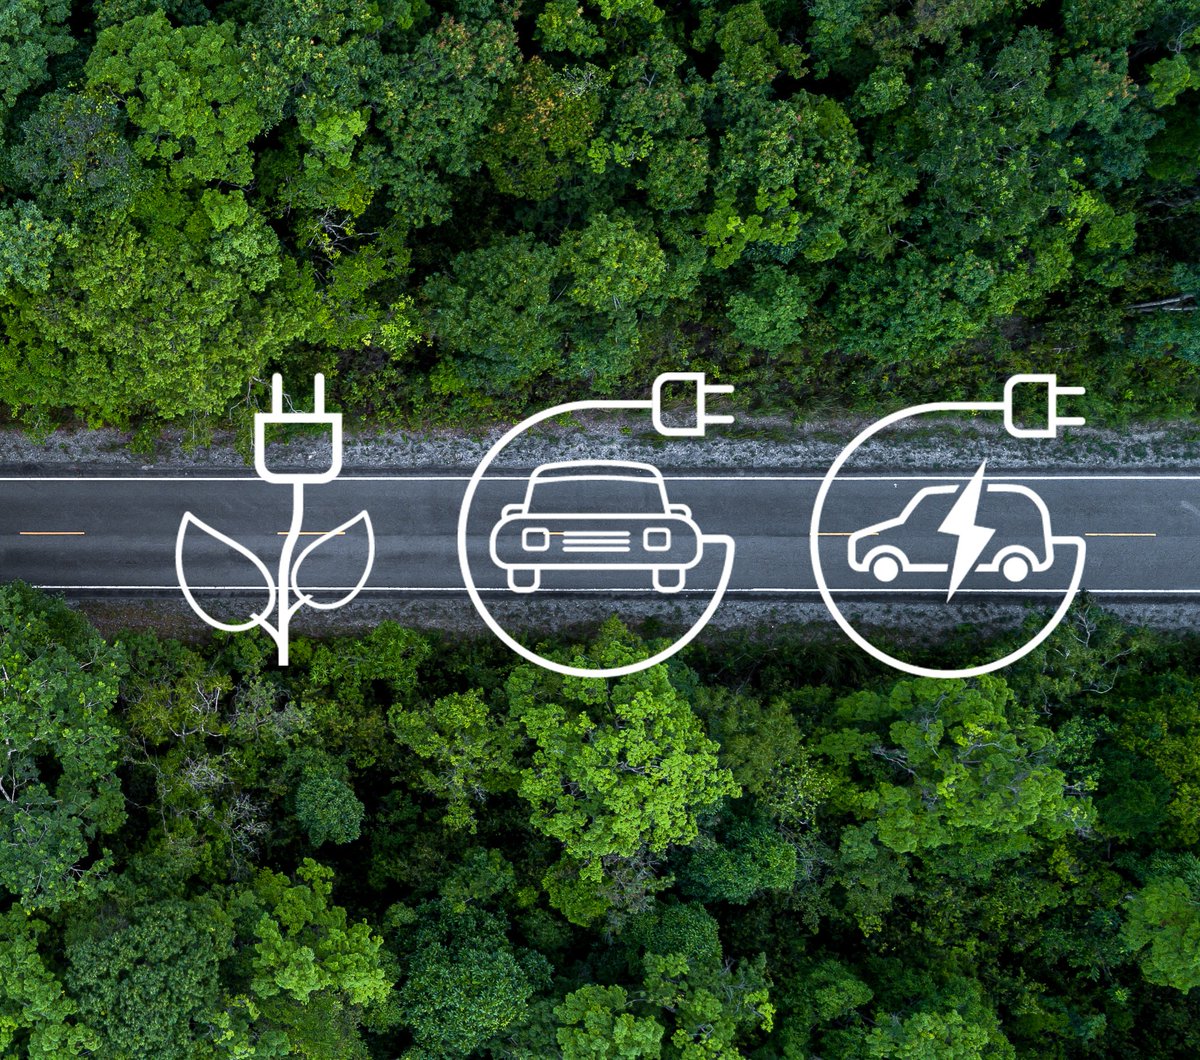 🌎🚆🚘✈️Be it on land, sea or air, transportation is evolving to meet new sustainability and mobility requirements. IEC work provides the technical foundation for all such new mobility systems -electricity or hydrogen-powered. Explore: bit.ly/3zcHVFW #IECTransportation